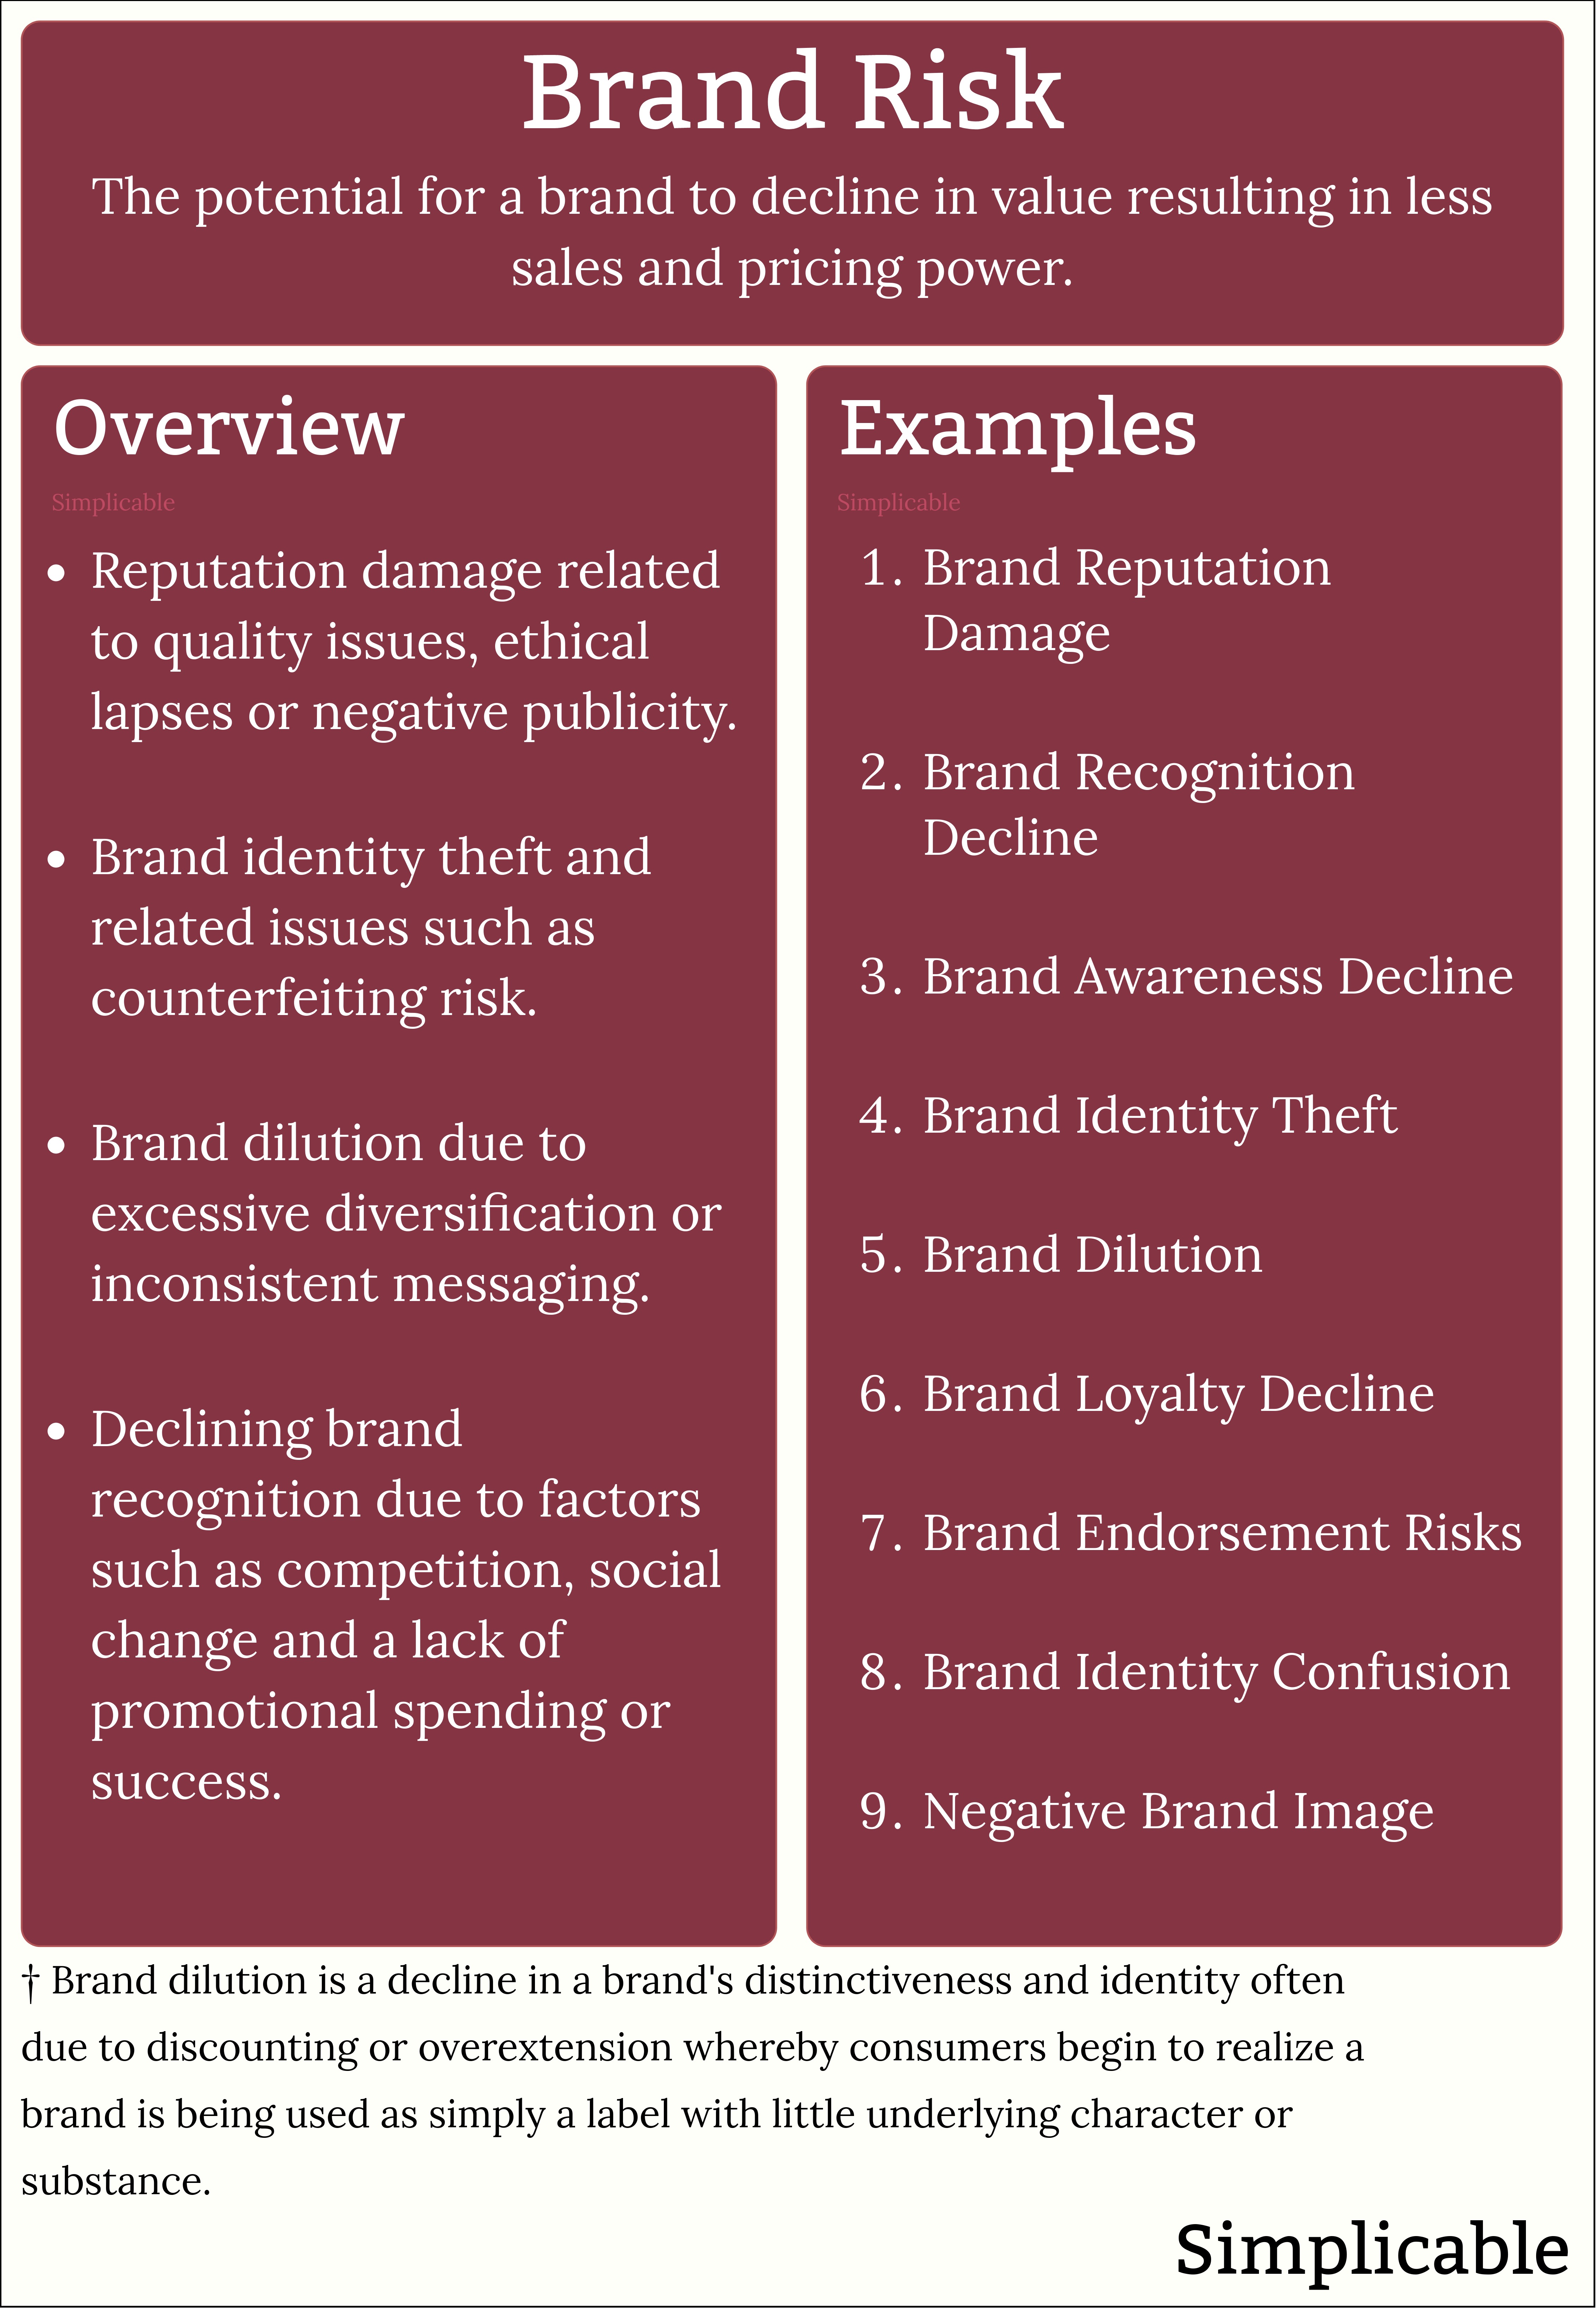 brand risk overview and examples